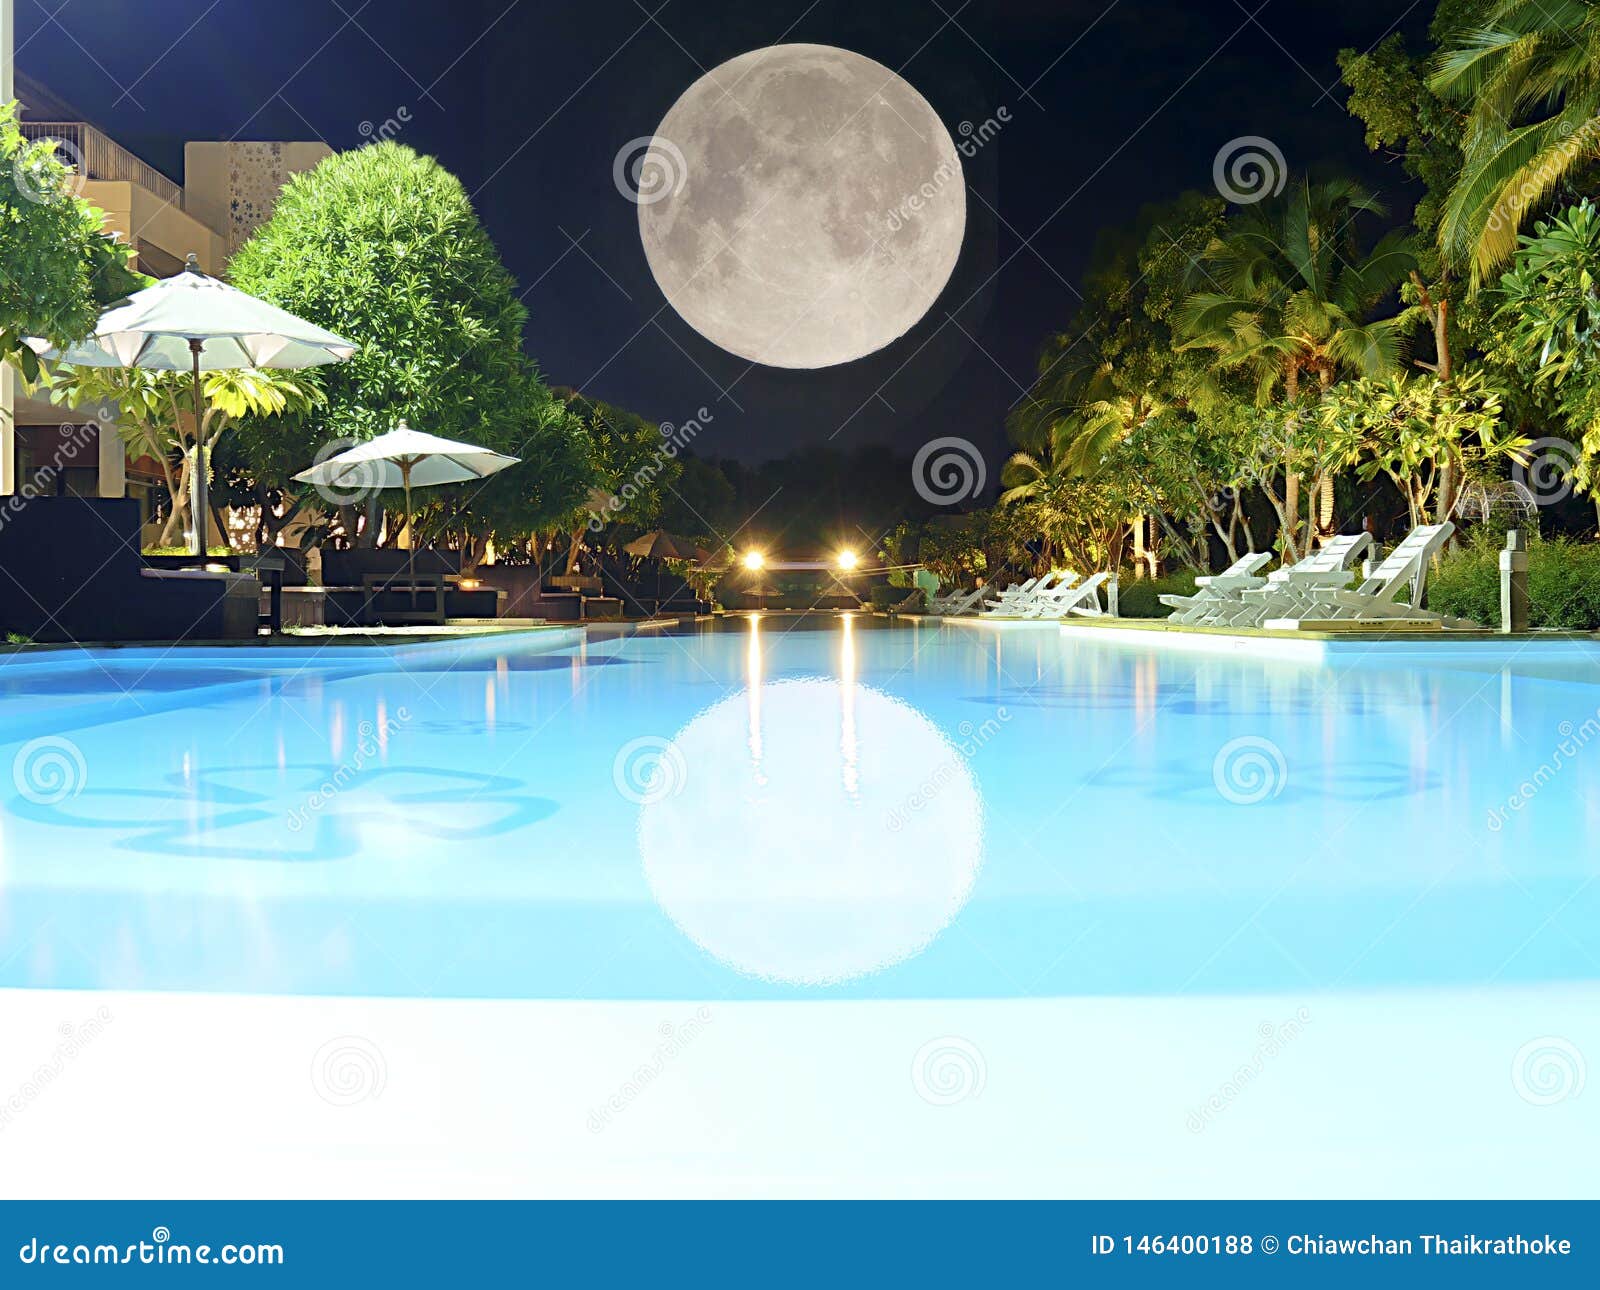 Beautiful Swimming Pool At Night View With Full Moon Umbrella And